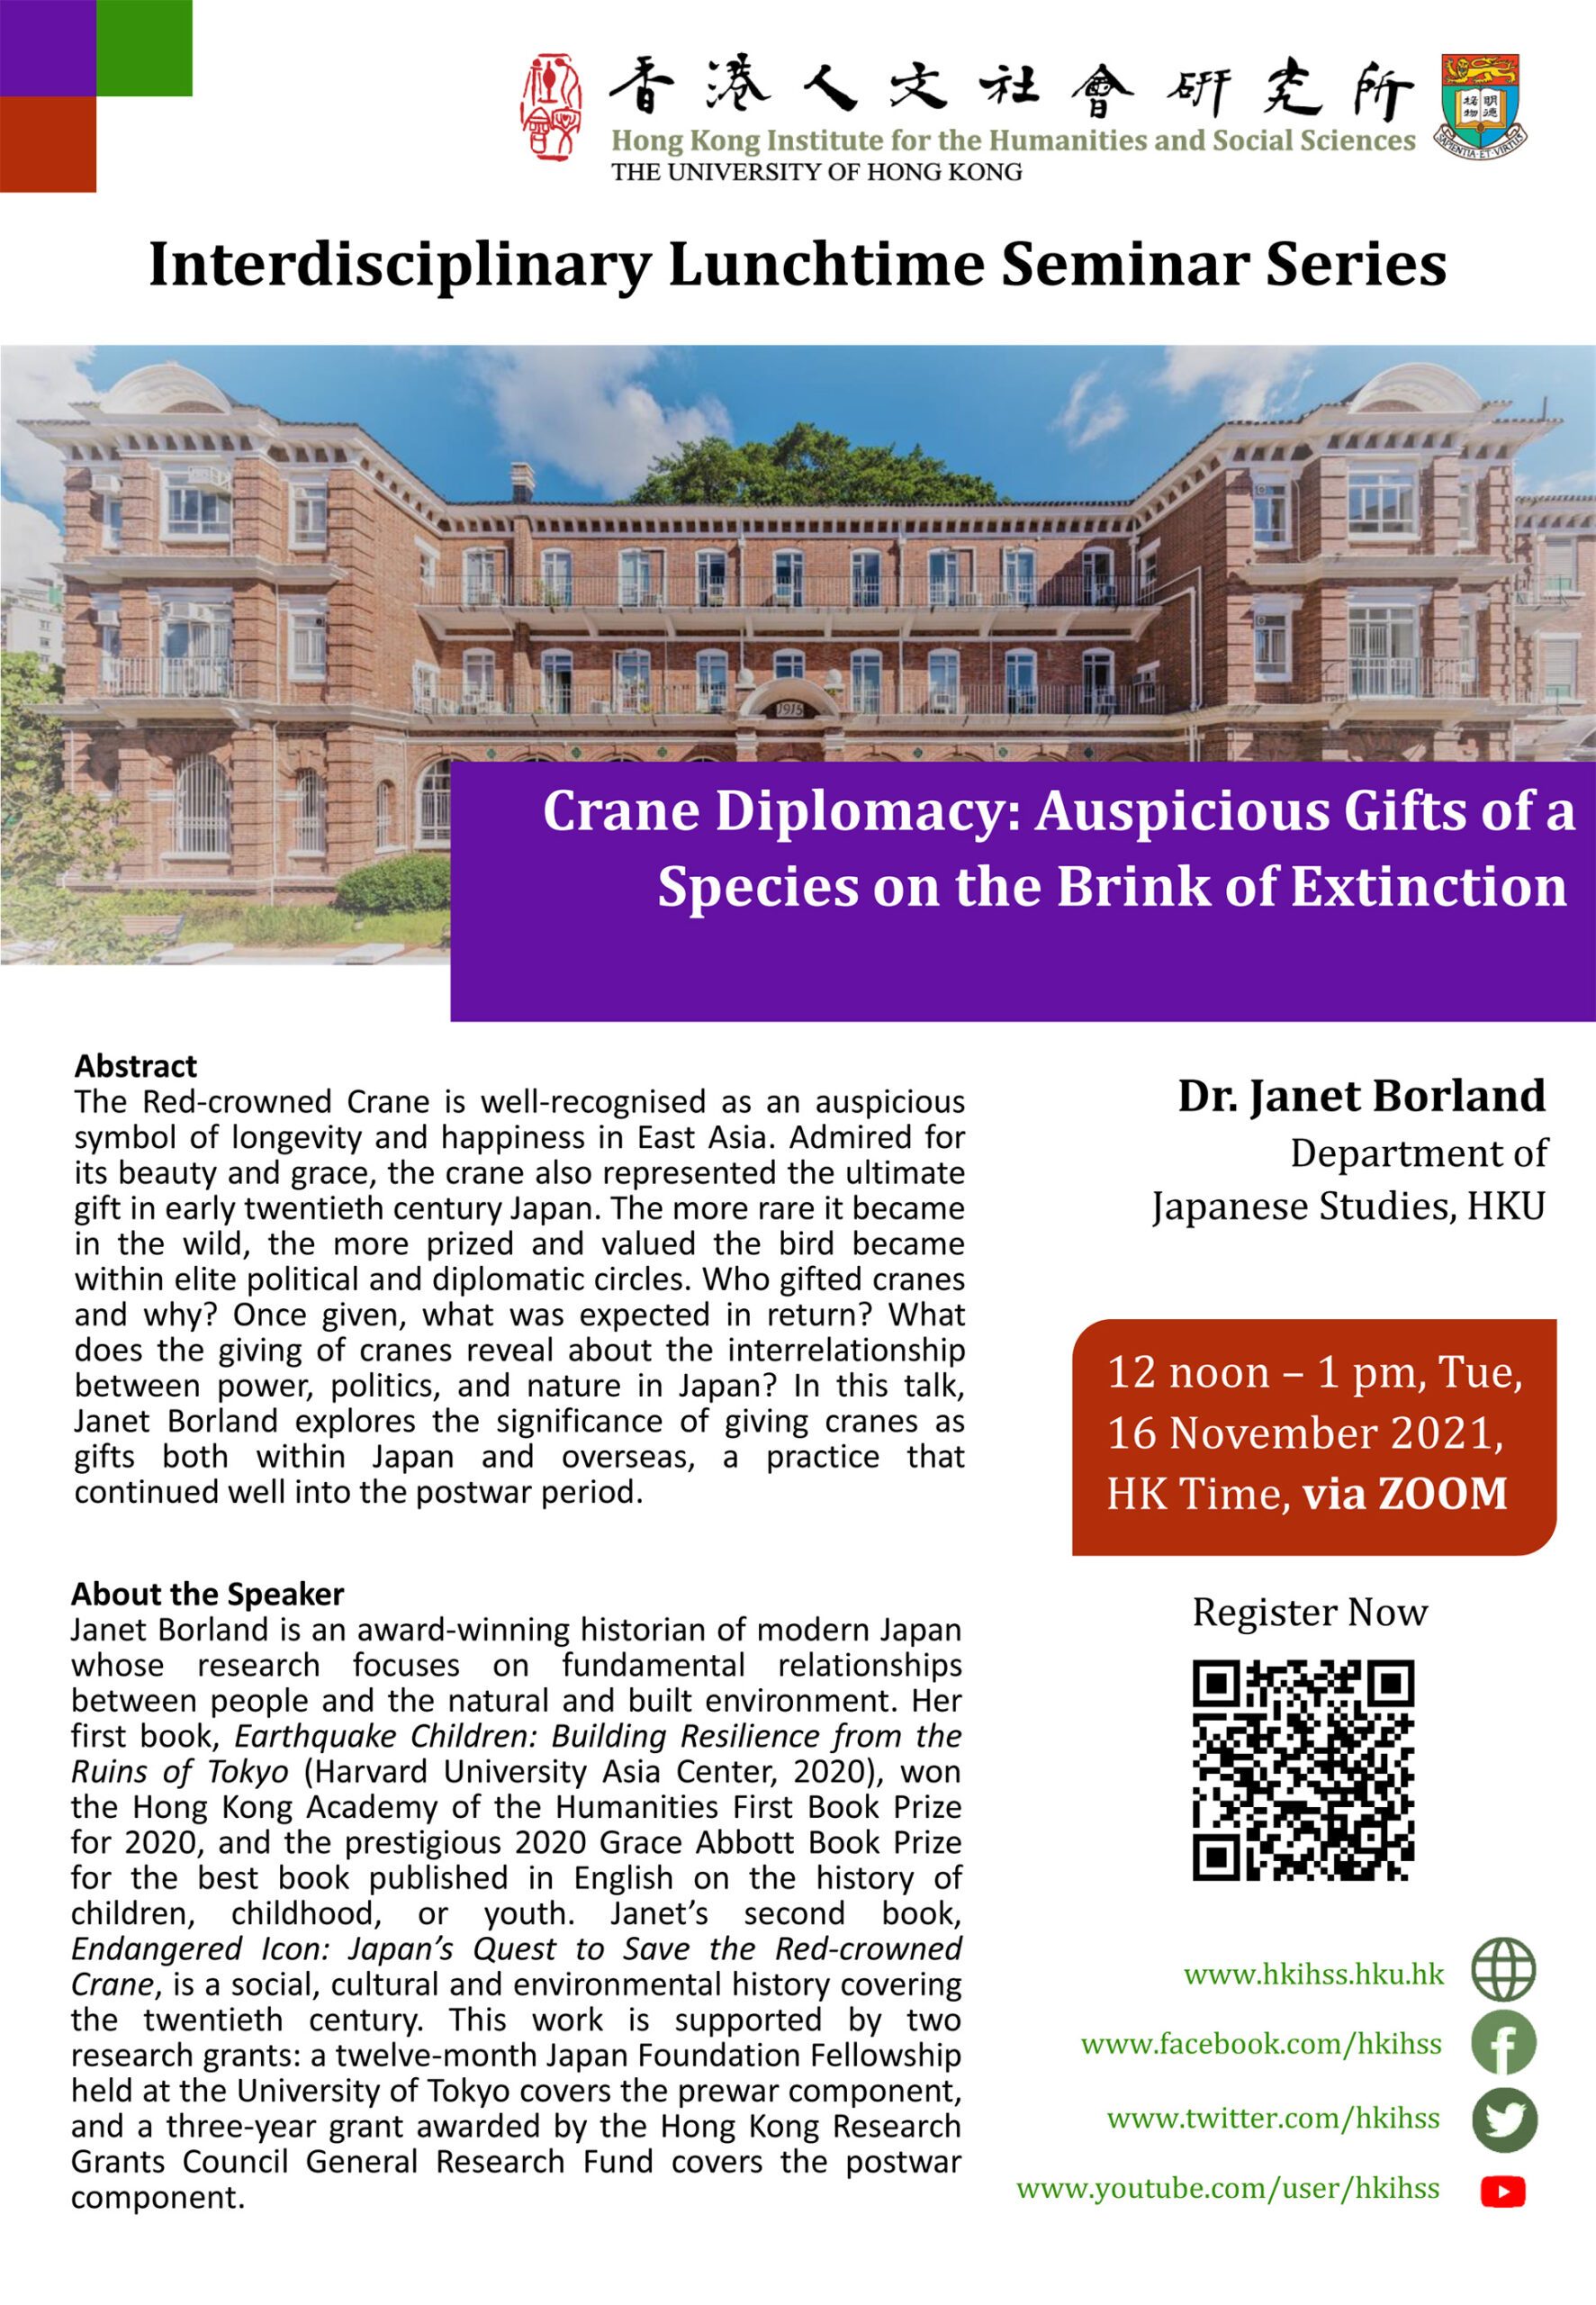 Interdisciplinary Lunchtime Seminar on “Crane Diplomacy: Auspicious Gifts of a Species on the Brink of Extinction” by Dr. Janet Borland (November 16, 2021)